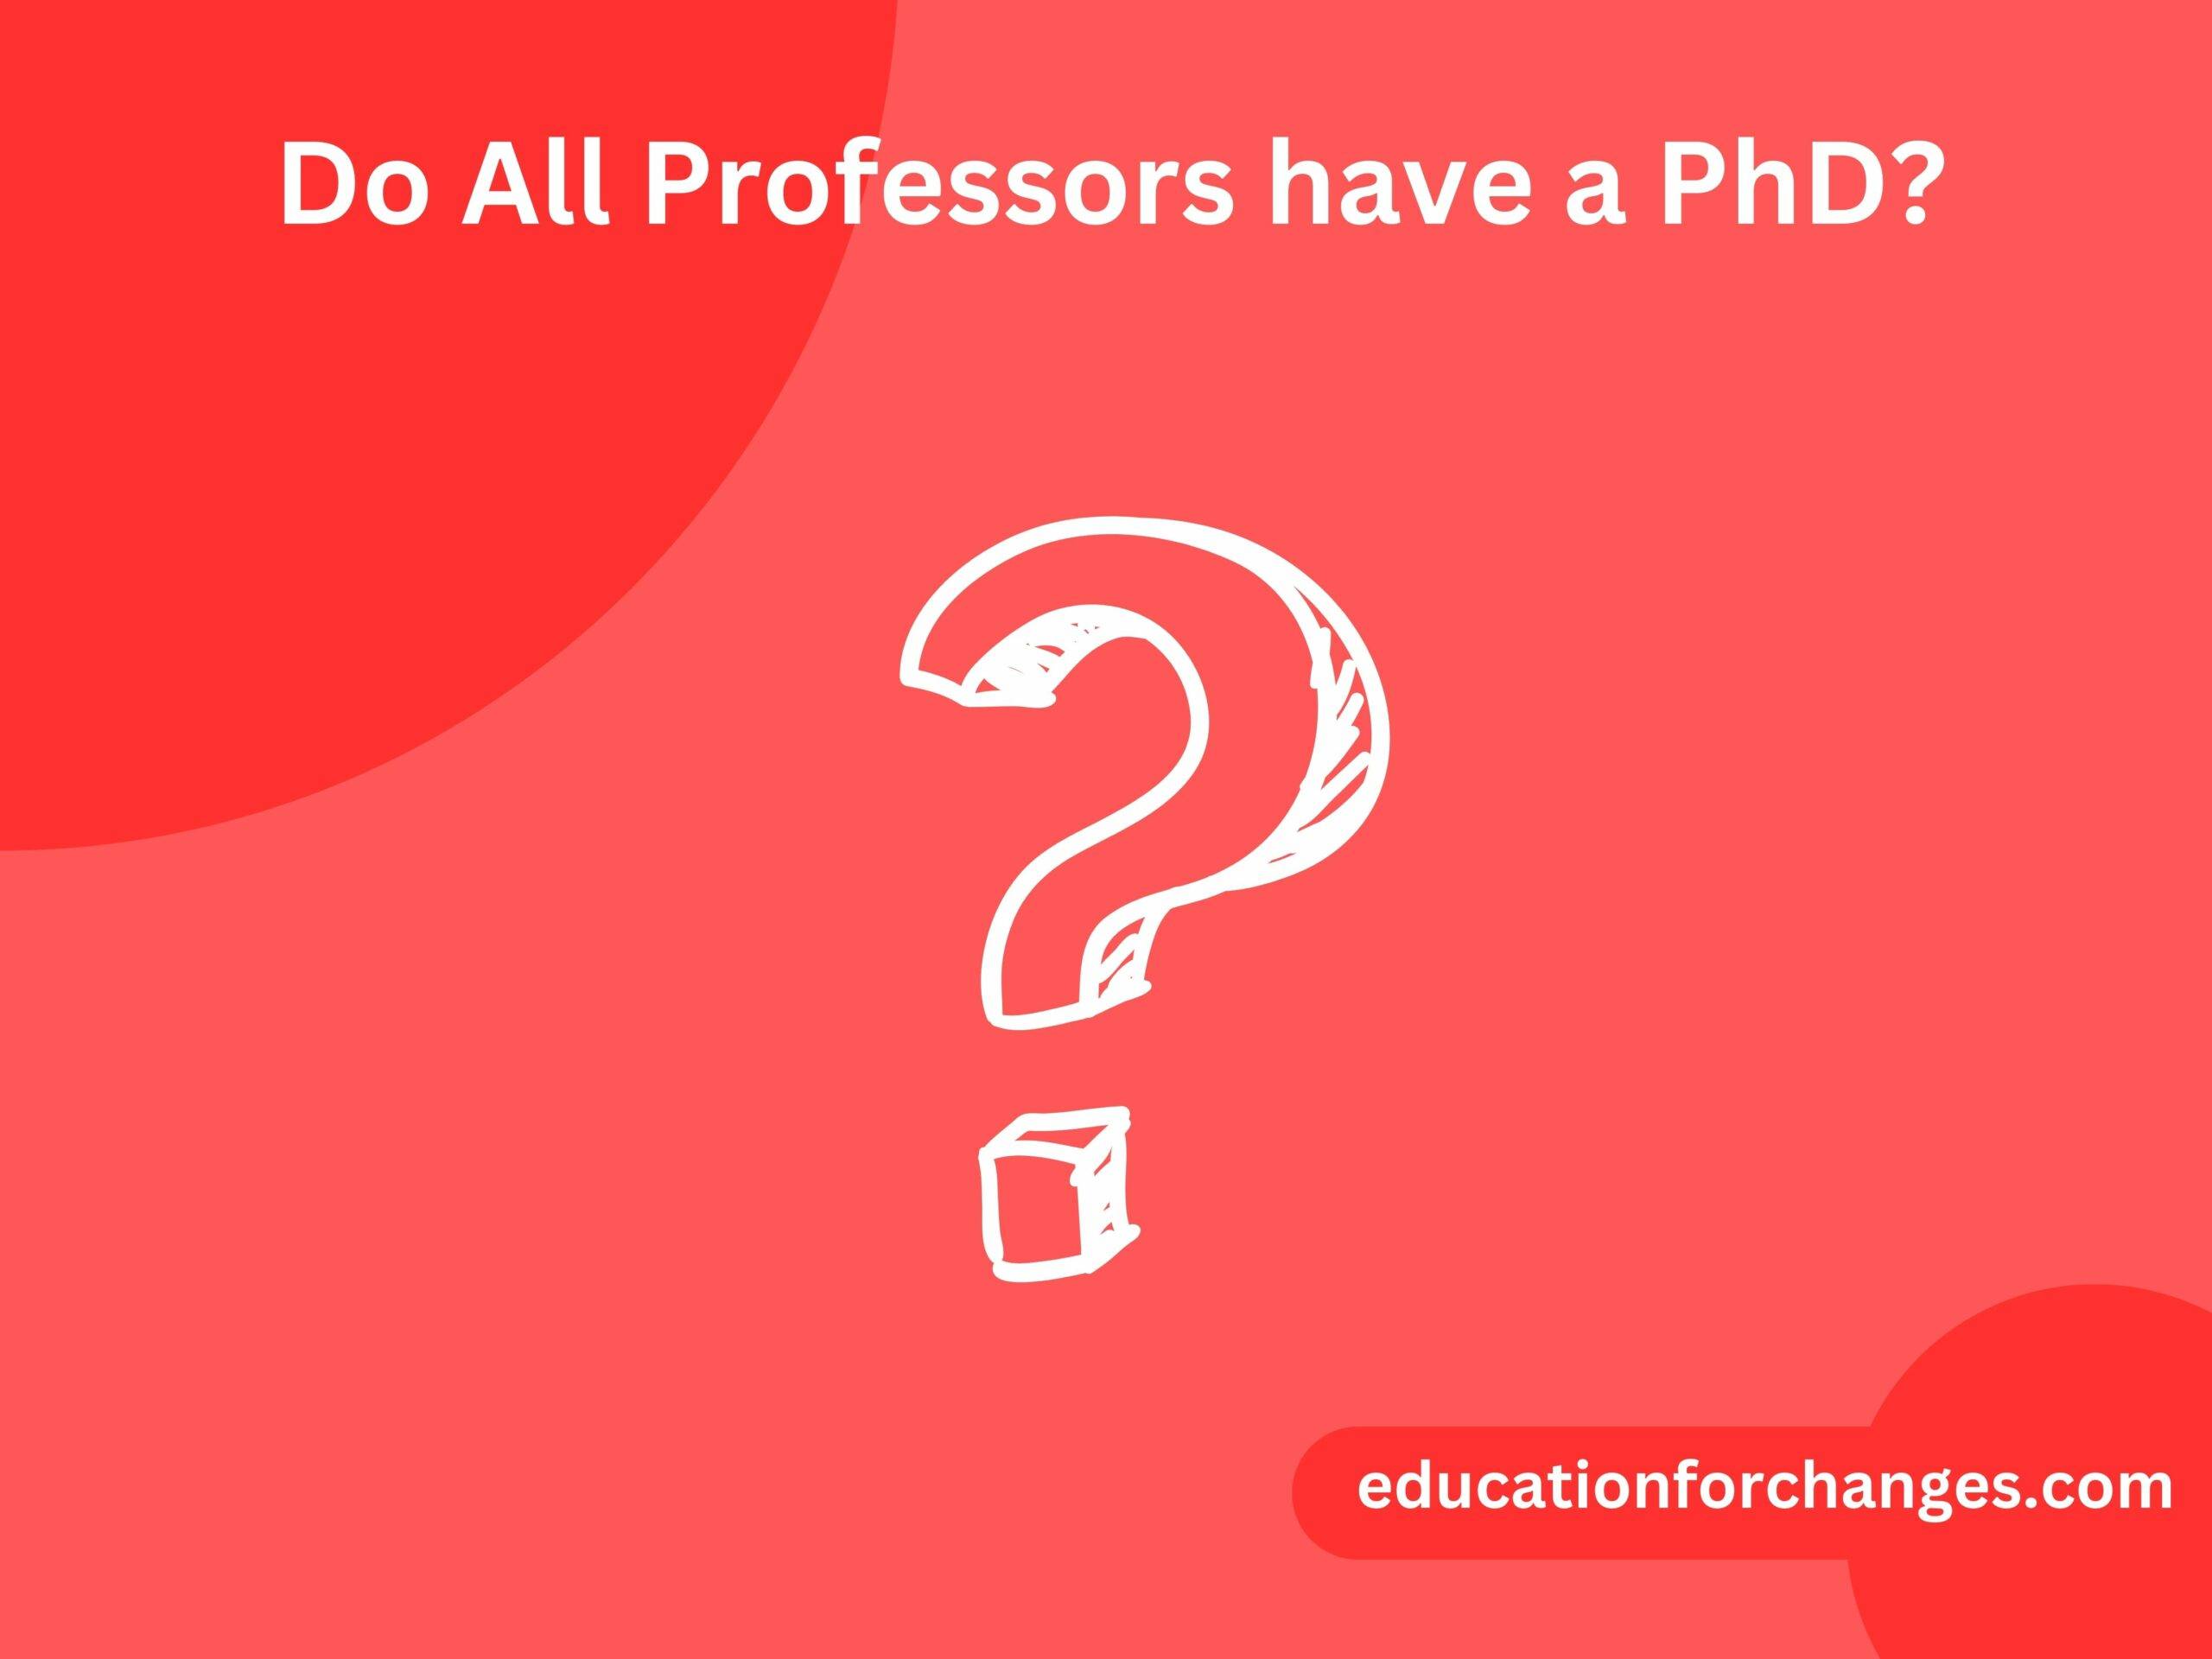 Do All Professors have a PhD